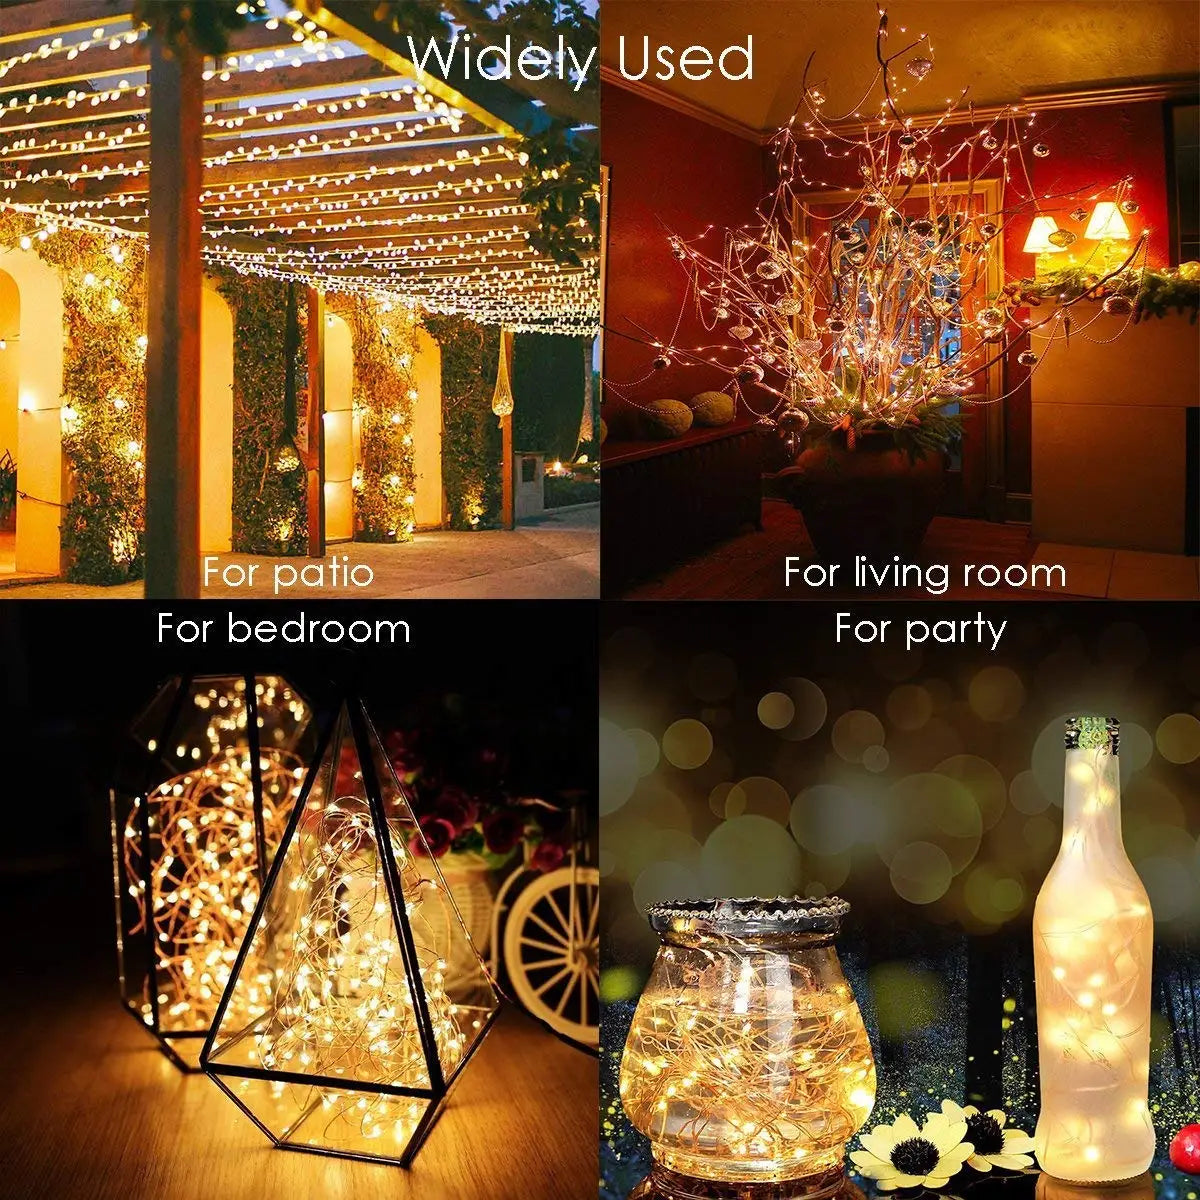 LED Solar Fairy Light, Solar-powered fairy lights perfect for outdoor and indoor spaces, parties, and everyday ambiance.